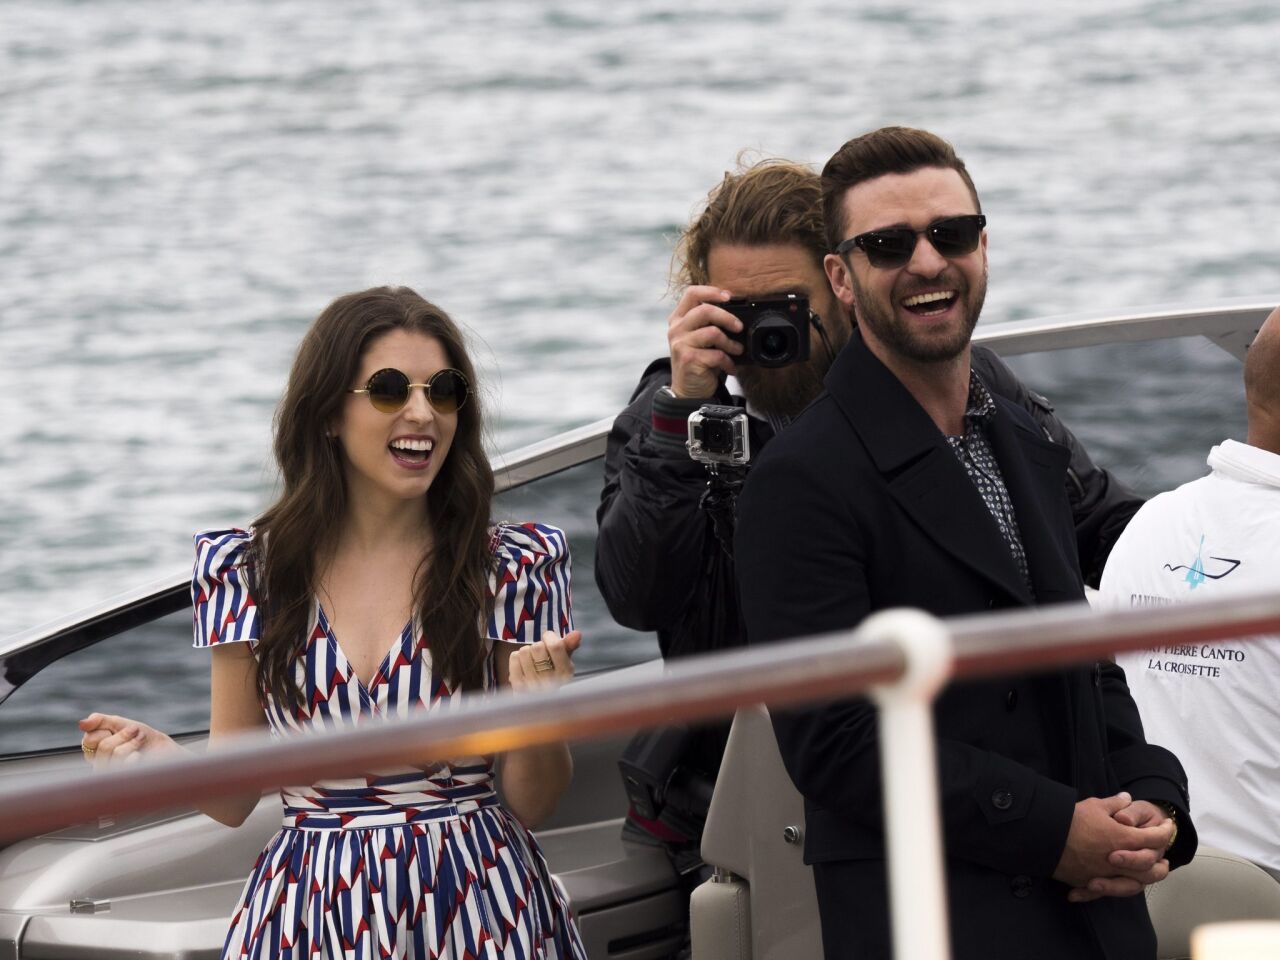 Actress Anna Kendrick, left, and Justin Timberlake, right, arrive by boat to the photocall for "Trolls" at the 69th annual Cannes Film Festival on Wednesday.